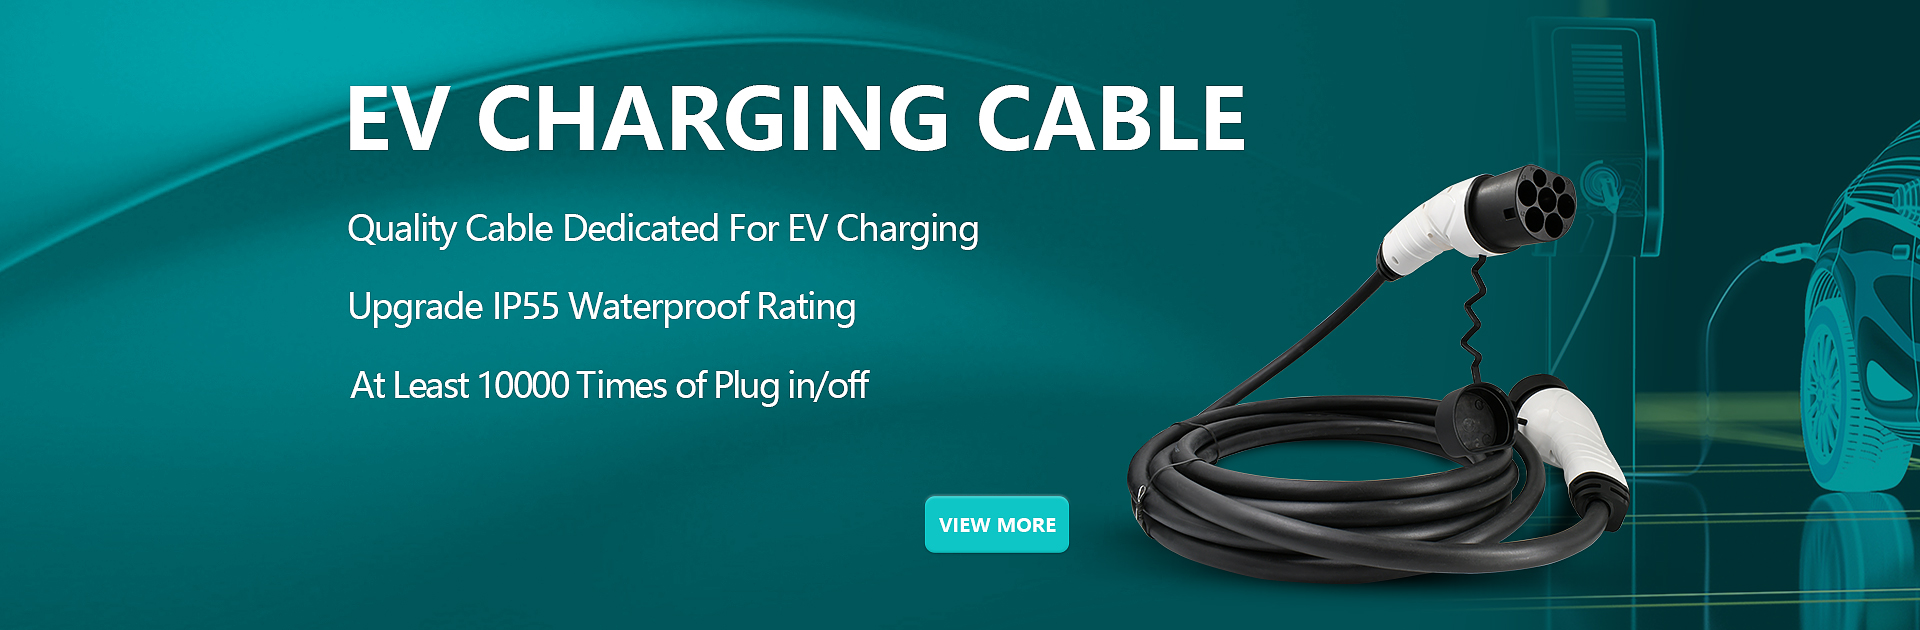 slocable ev charging cable hae